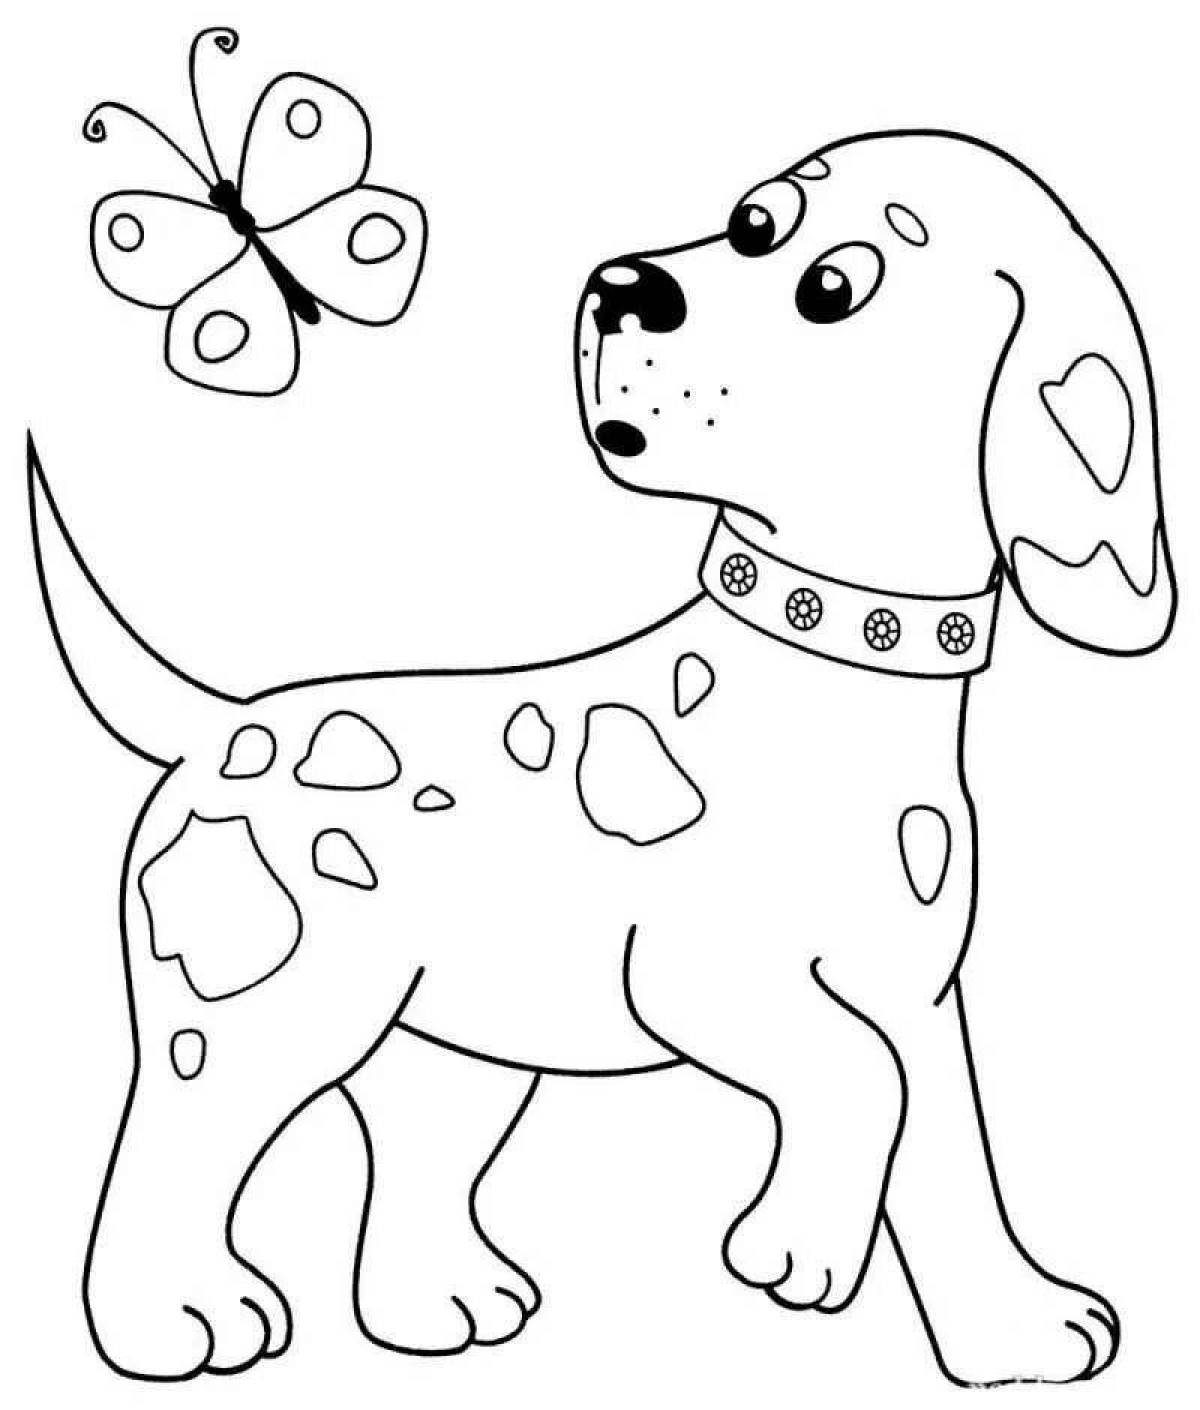 Intriguing coloring book drawing of a dog